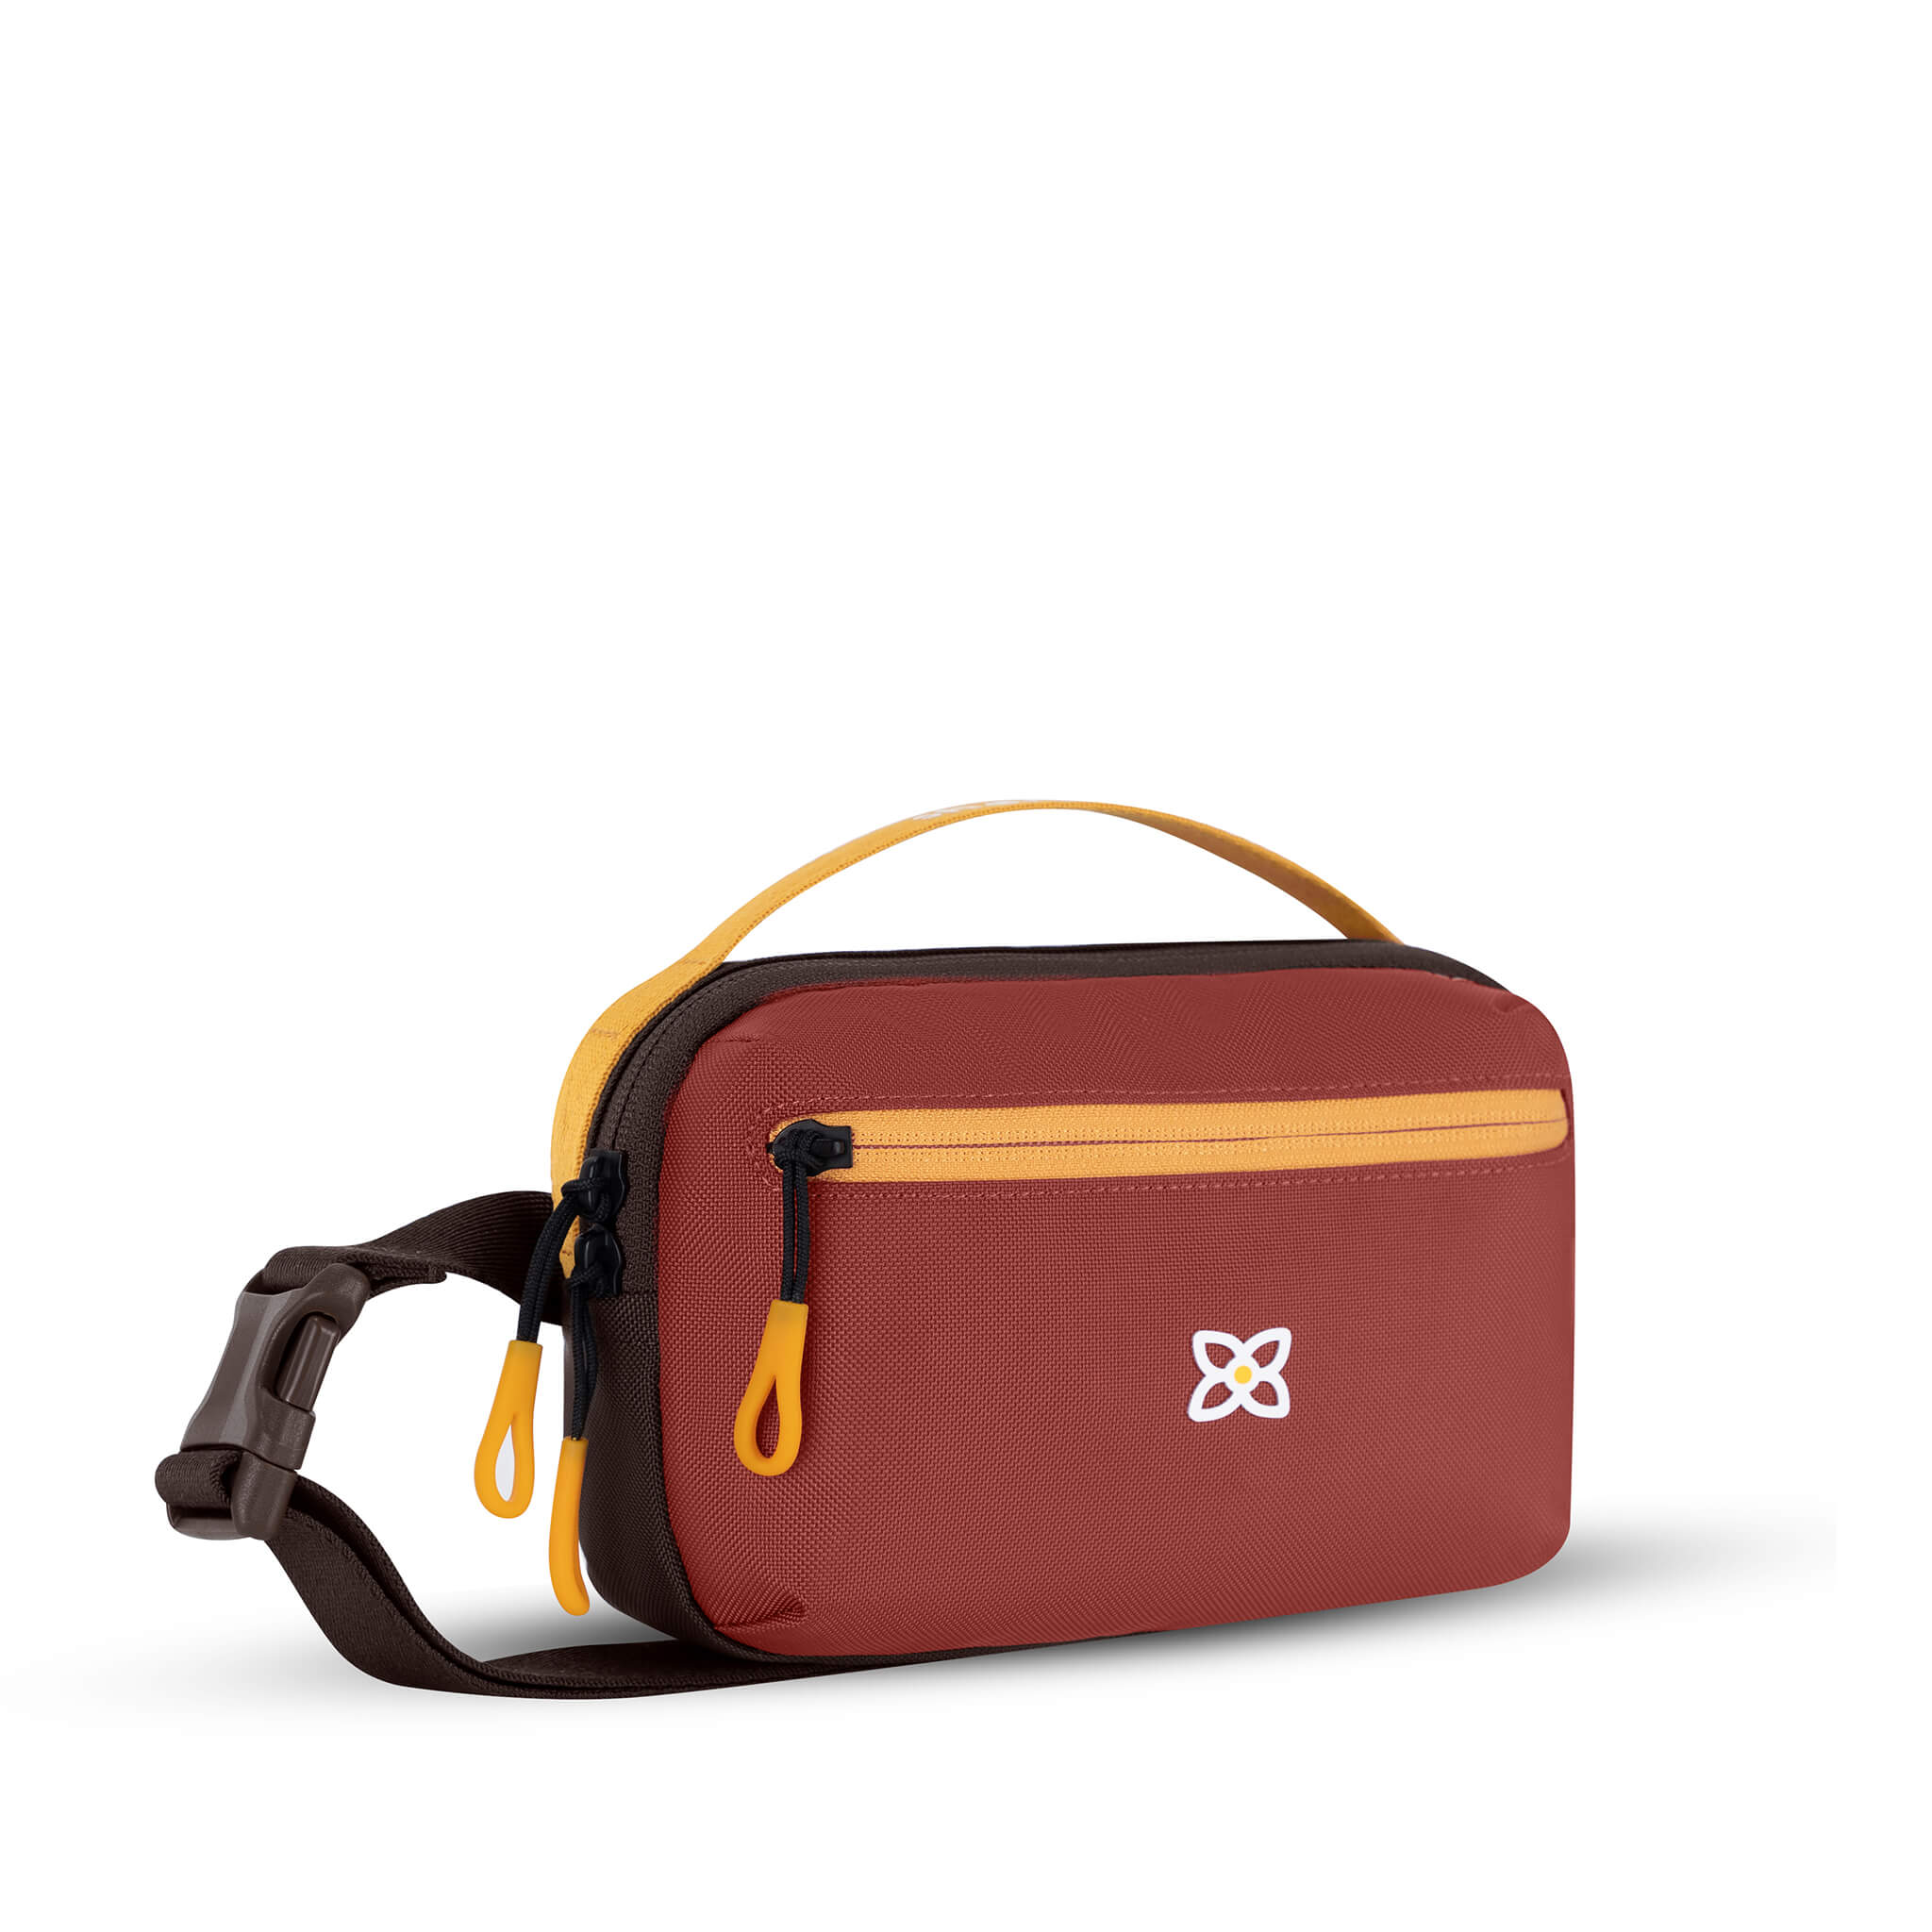 Angled front view of Sherpani hip pack, the Hyk in Cider. Hyk features include an adjustable waist strap, two external zipper pockets, an internal zipper pocket and RFID-blocking technology to block cyber theft. The Cider color is burgundy with yellow accents. 